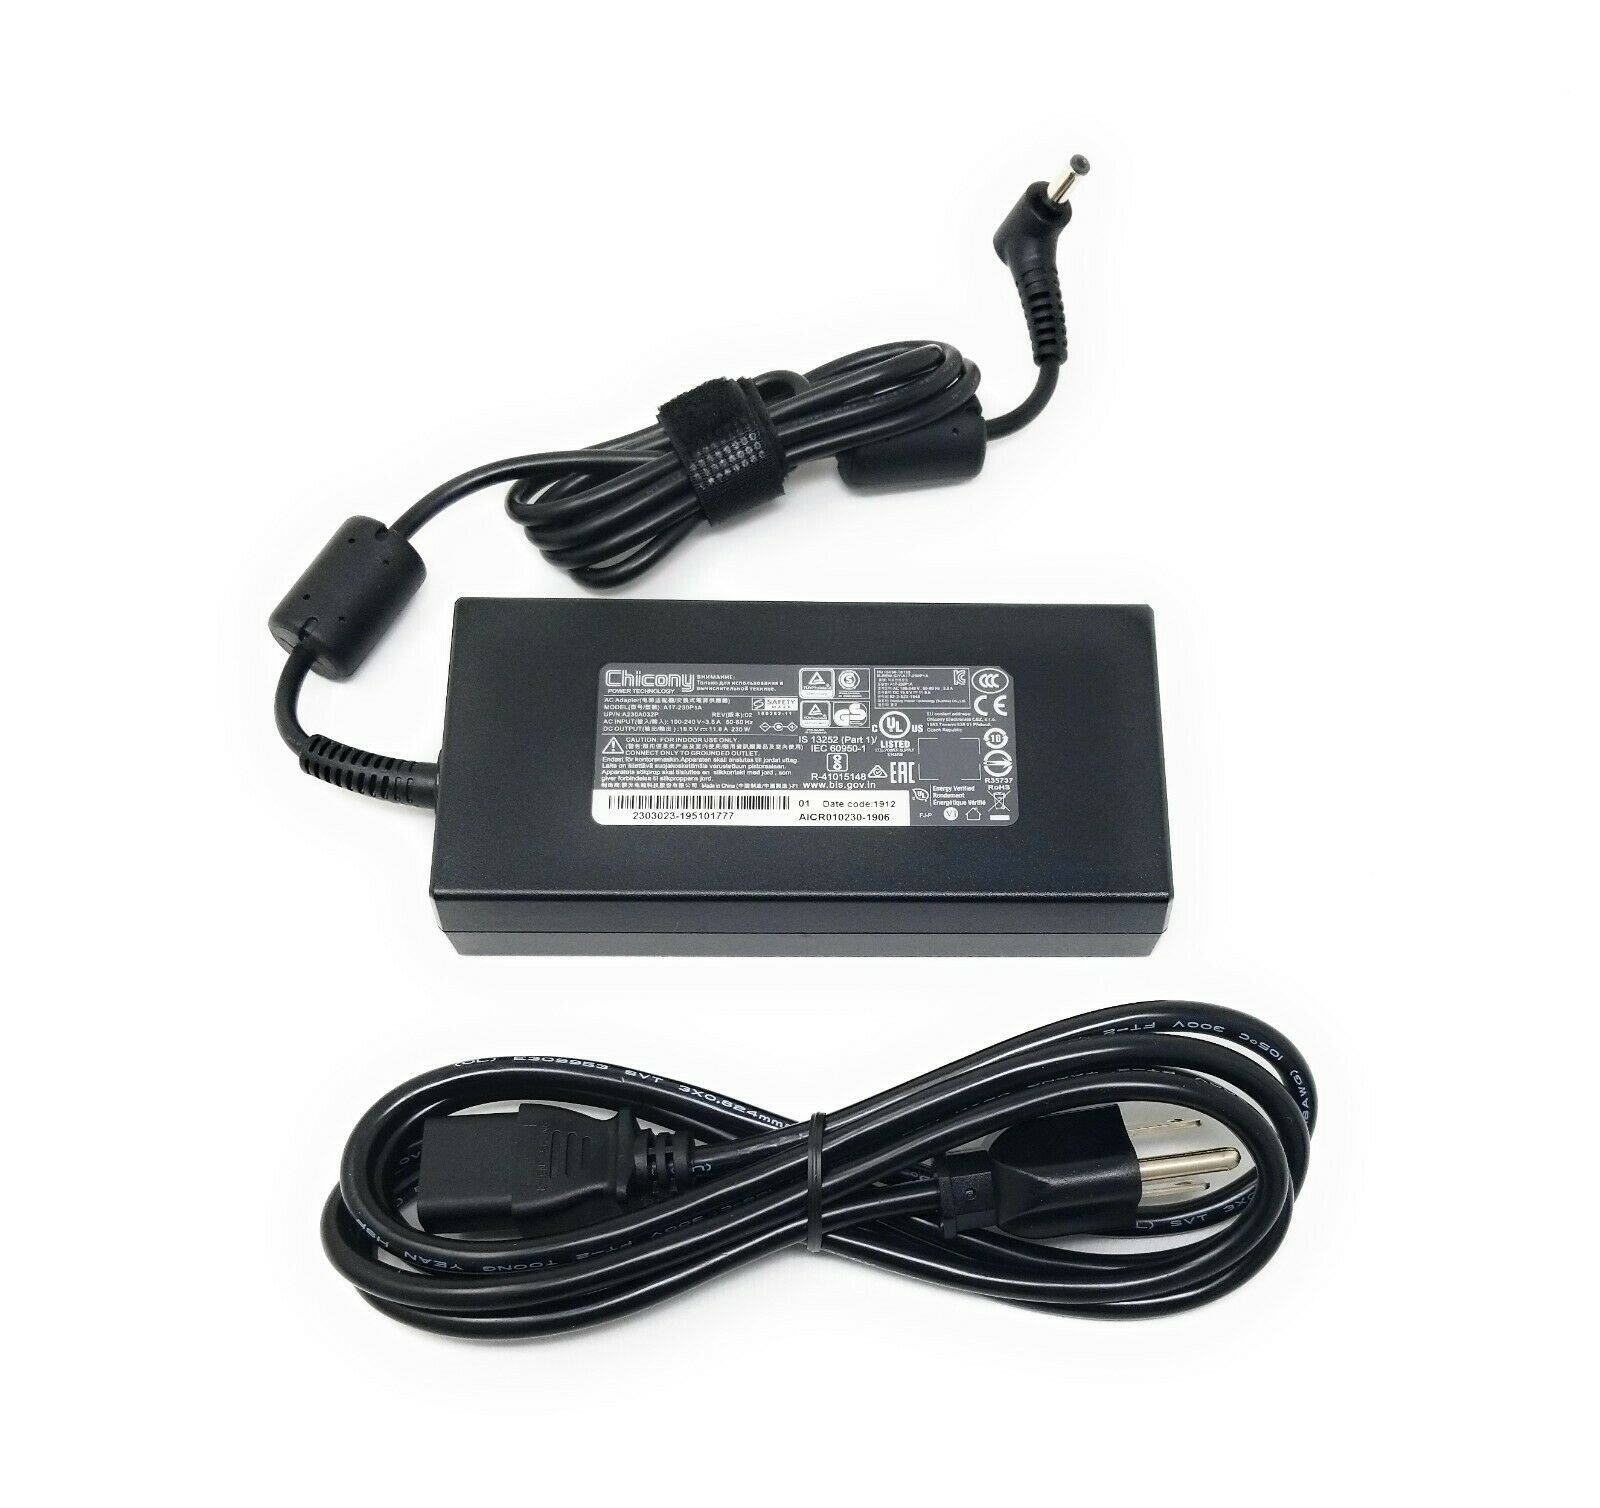 ADP-230 19.5V 11.8A 230W Chicony Charger A17-230P1A for Asus ROG Gaming Laptops